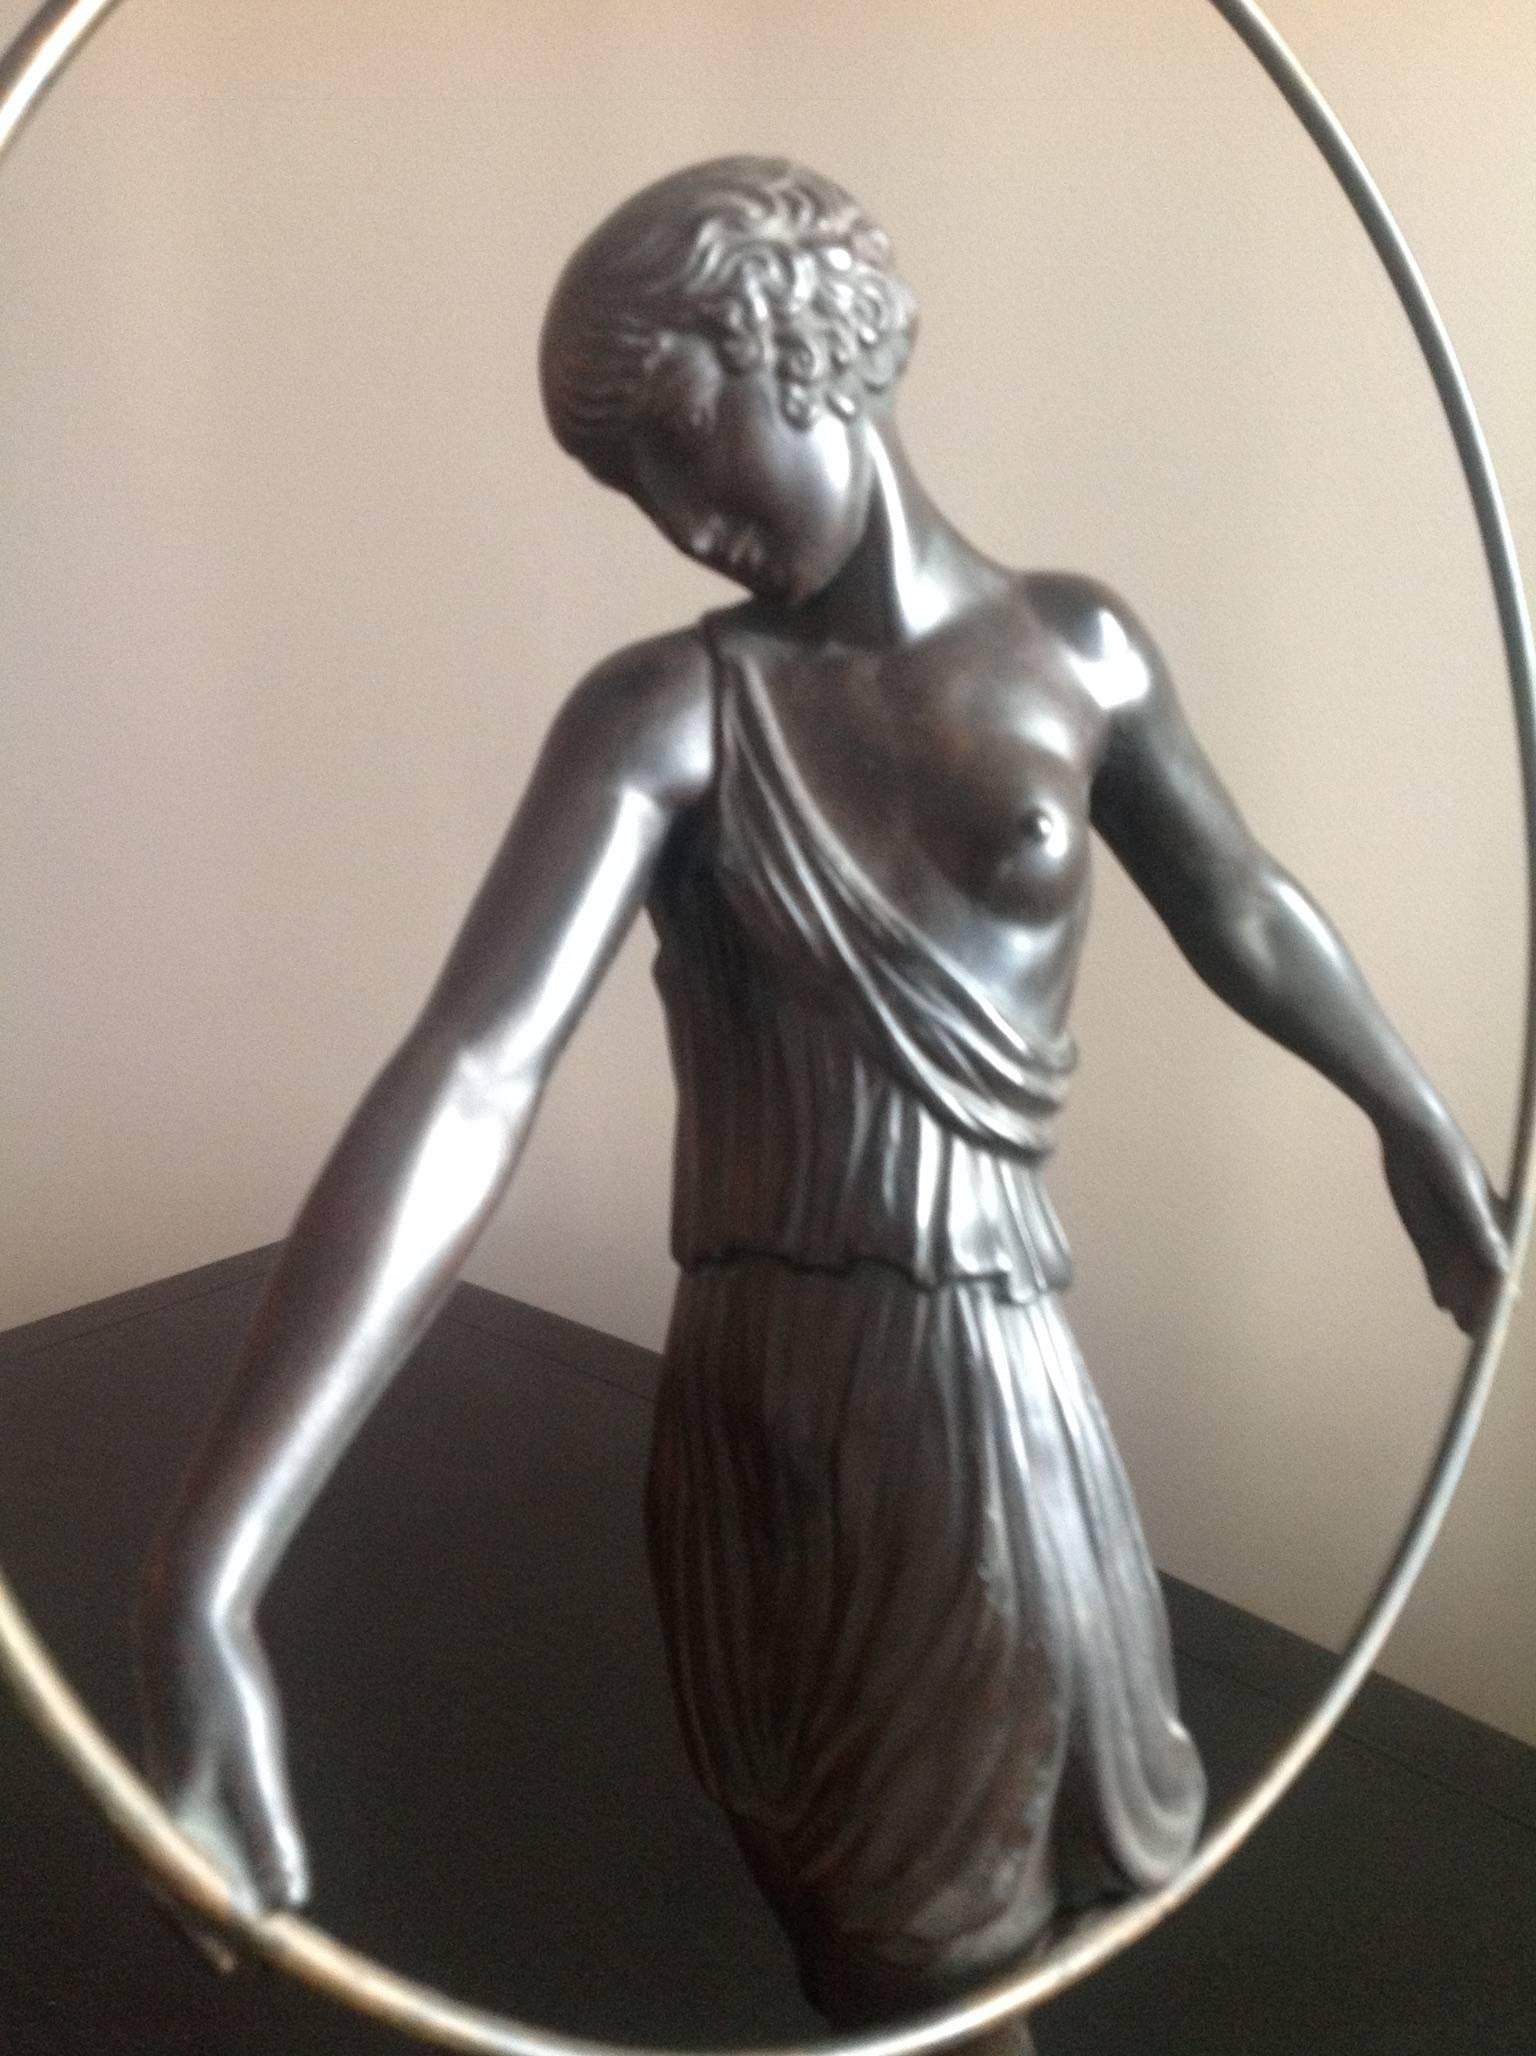 This Art Deco bronze with a marble base captures a lithe young woman dancing with a hoop. It is French bronze with a dark green patina and mounted on a black marble base.

It is by 